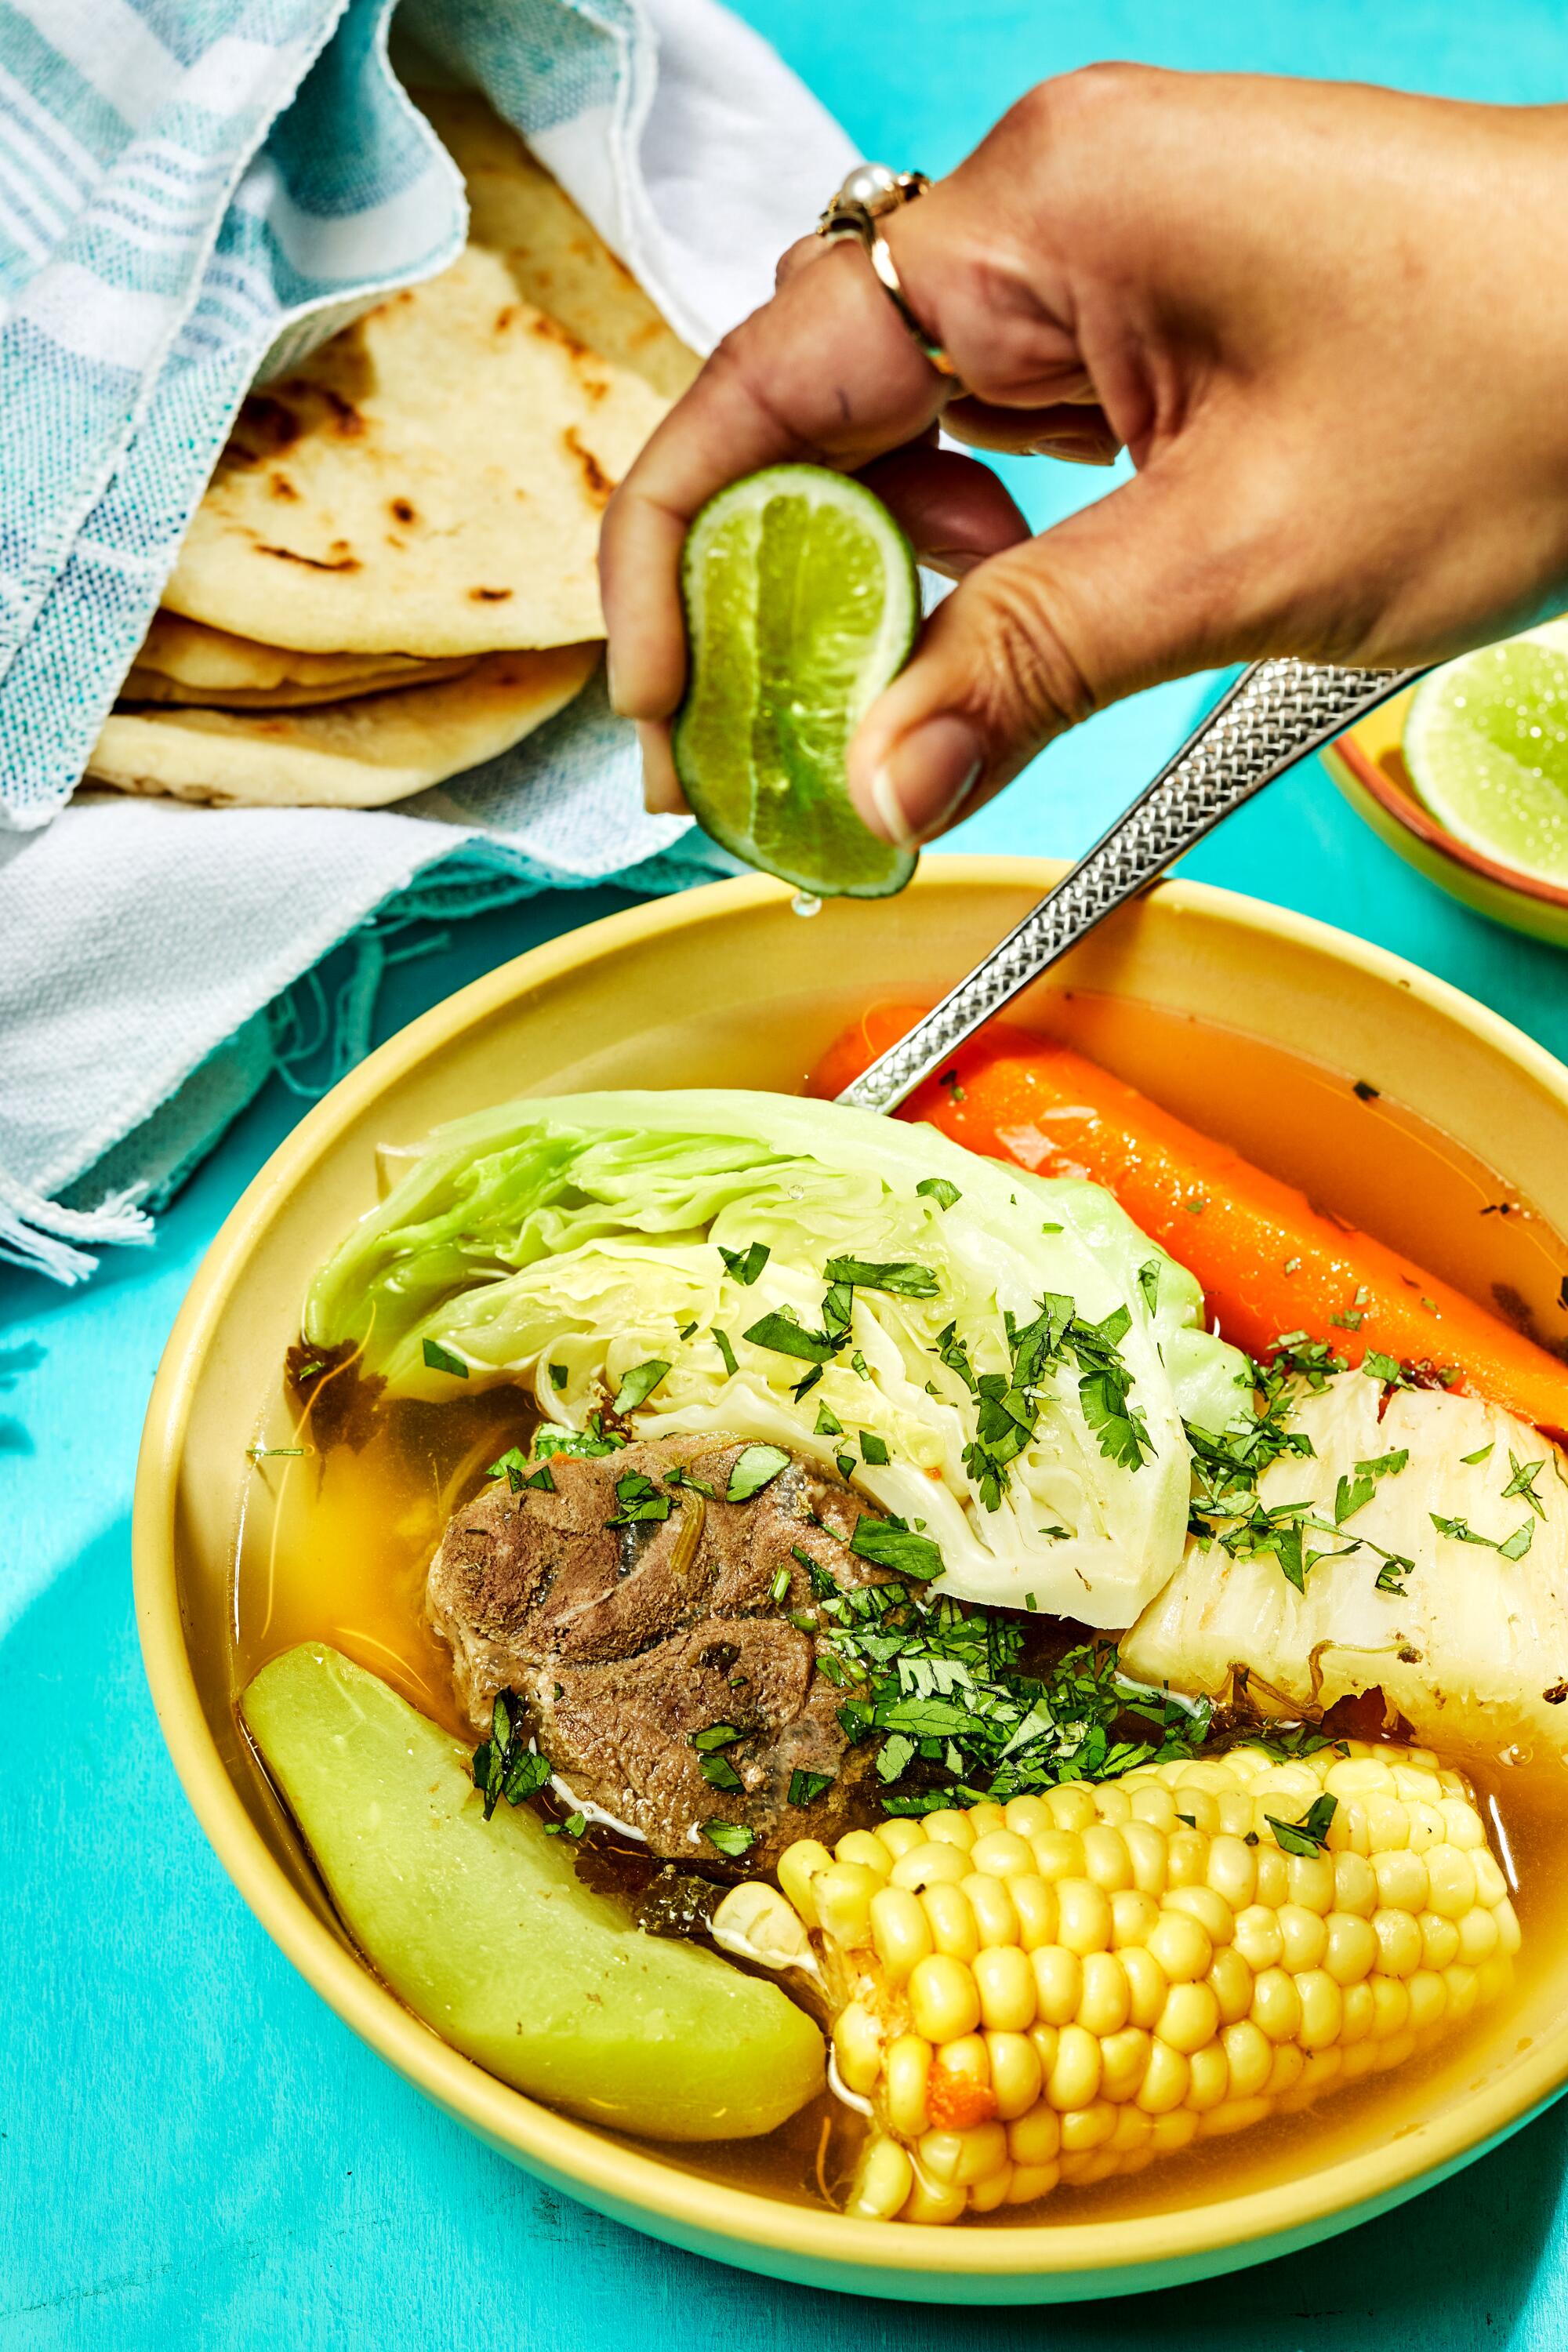 A comforting bowl of sopa de res made with beef shanks, chayote, yuca, corn and cabbage.